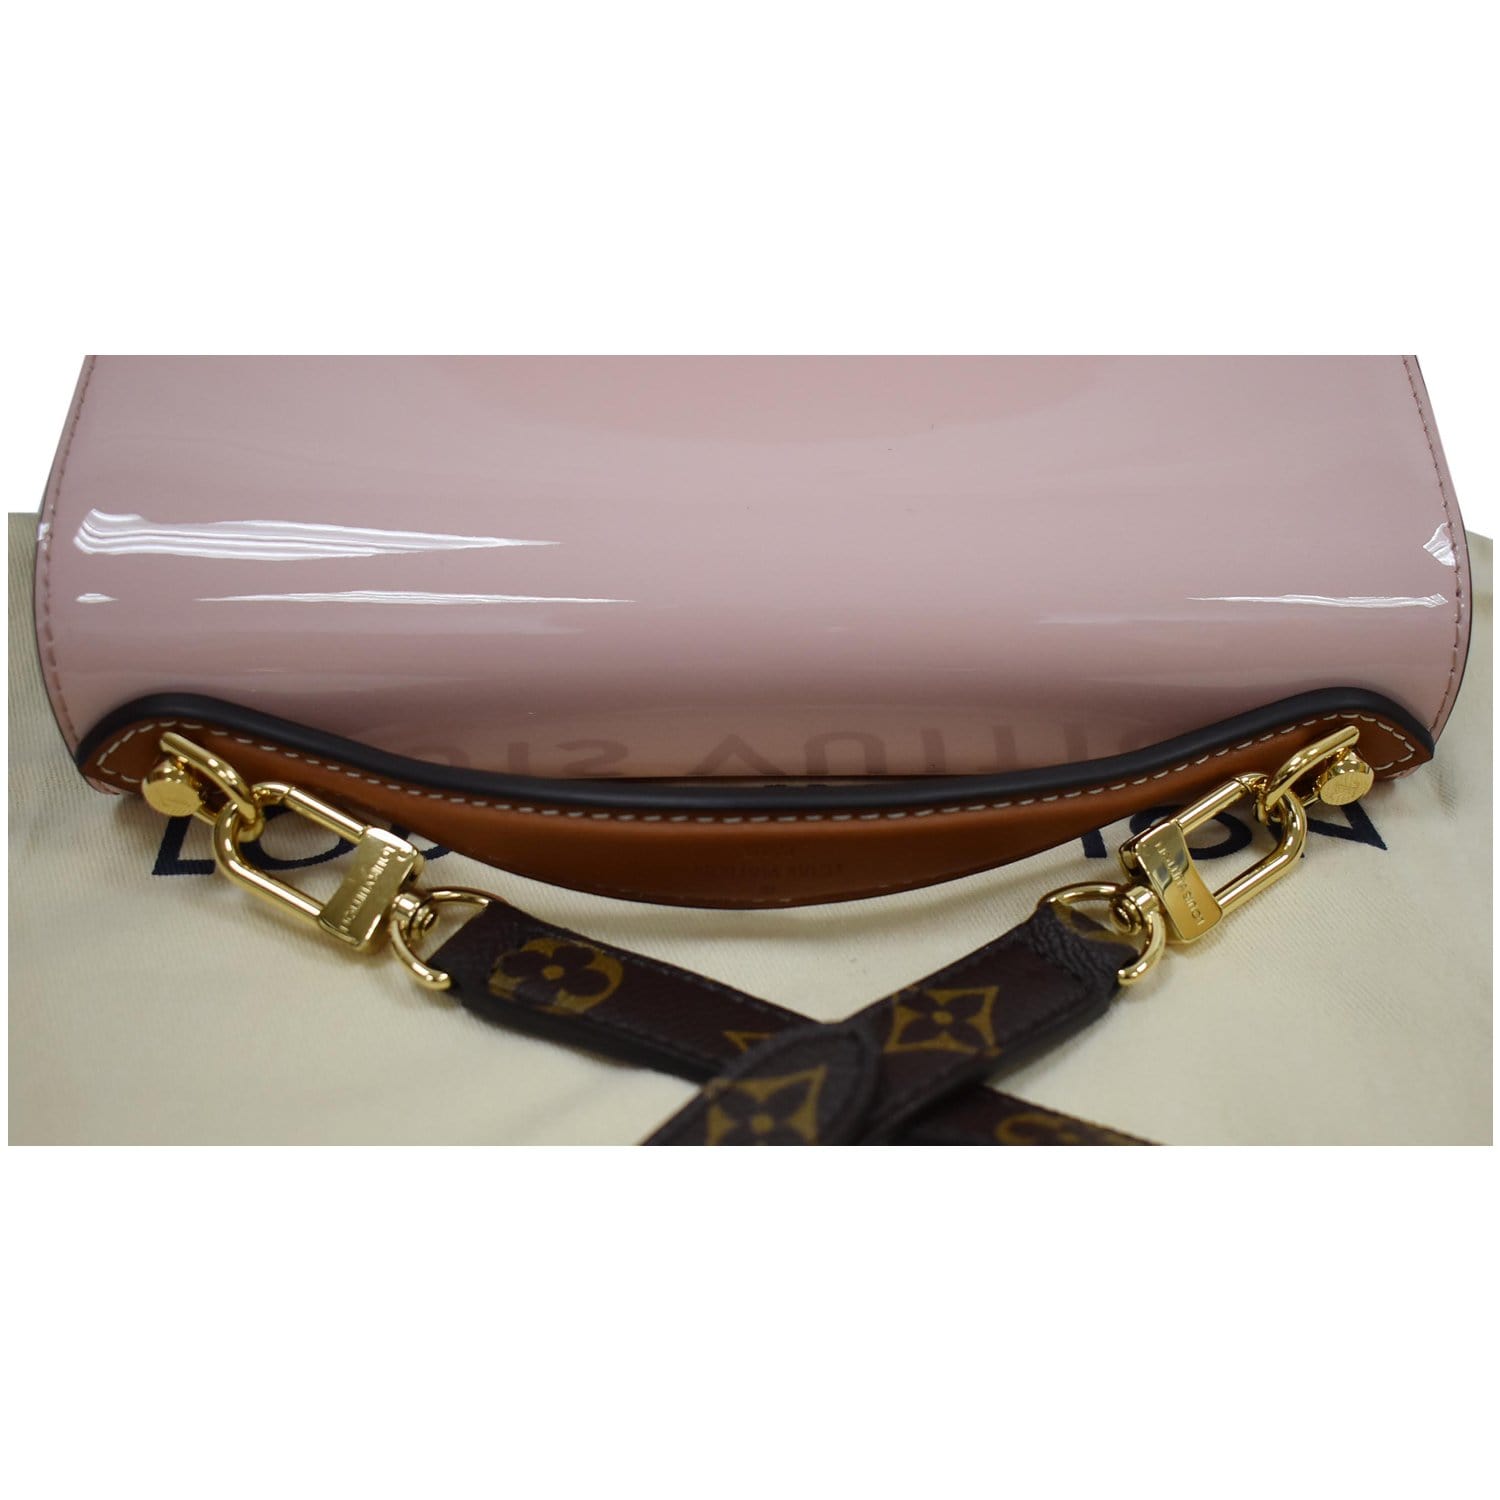 Sold at Auction: Louis Vuitton Cherrywood BB Top Handle Bag